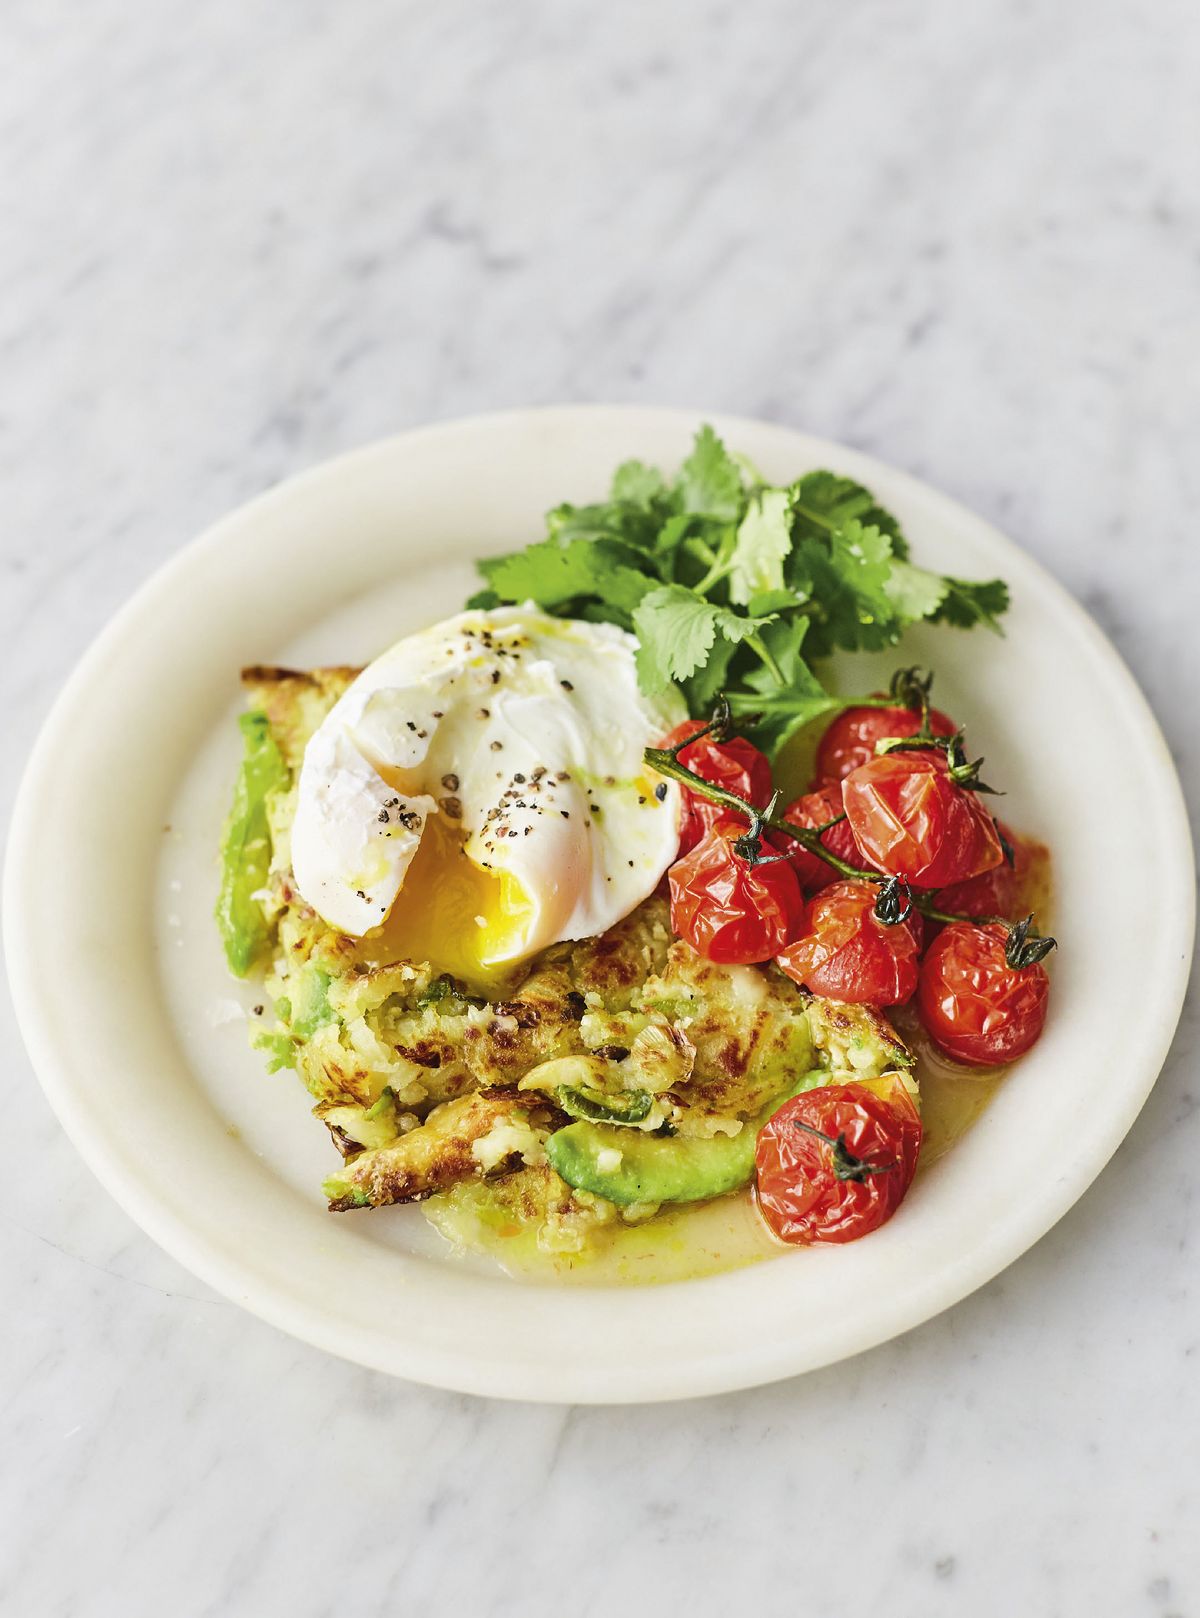 Jamie Oliver’s Avocado and Jalapeño Hash Brown with Roasted Vine Tomatoes, Spring Onions, Coriander, and Poached Eggs